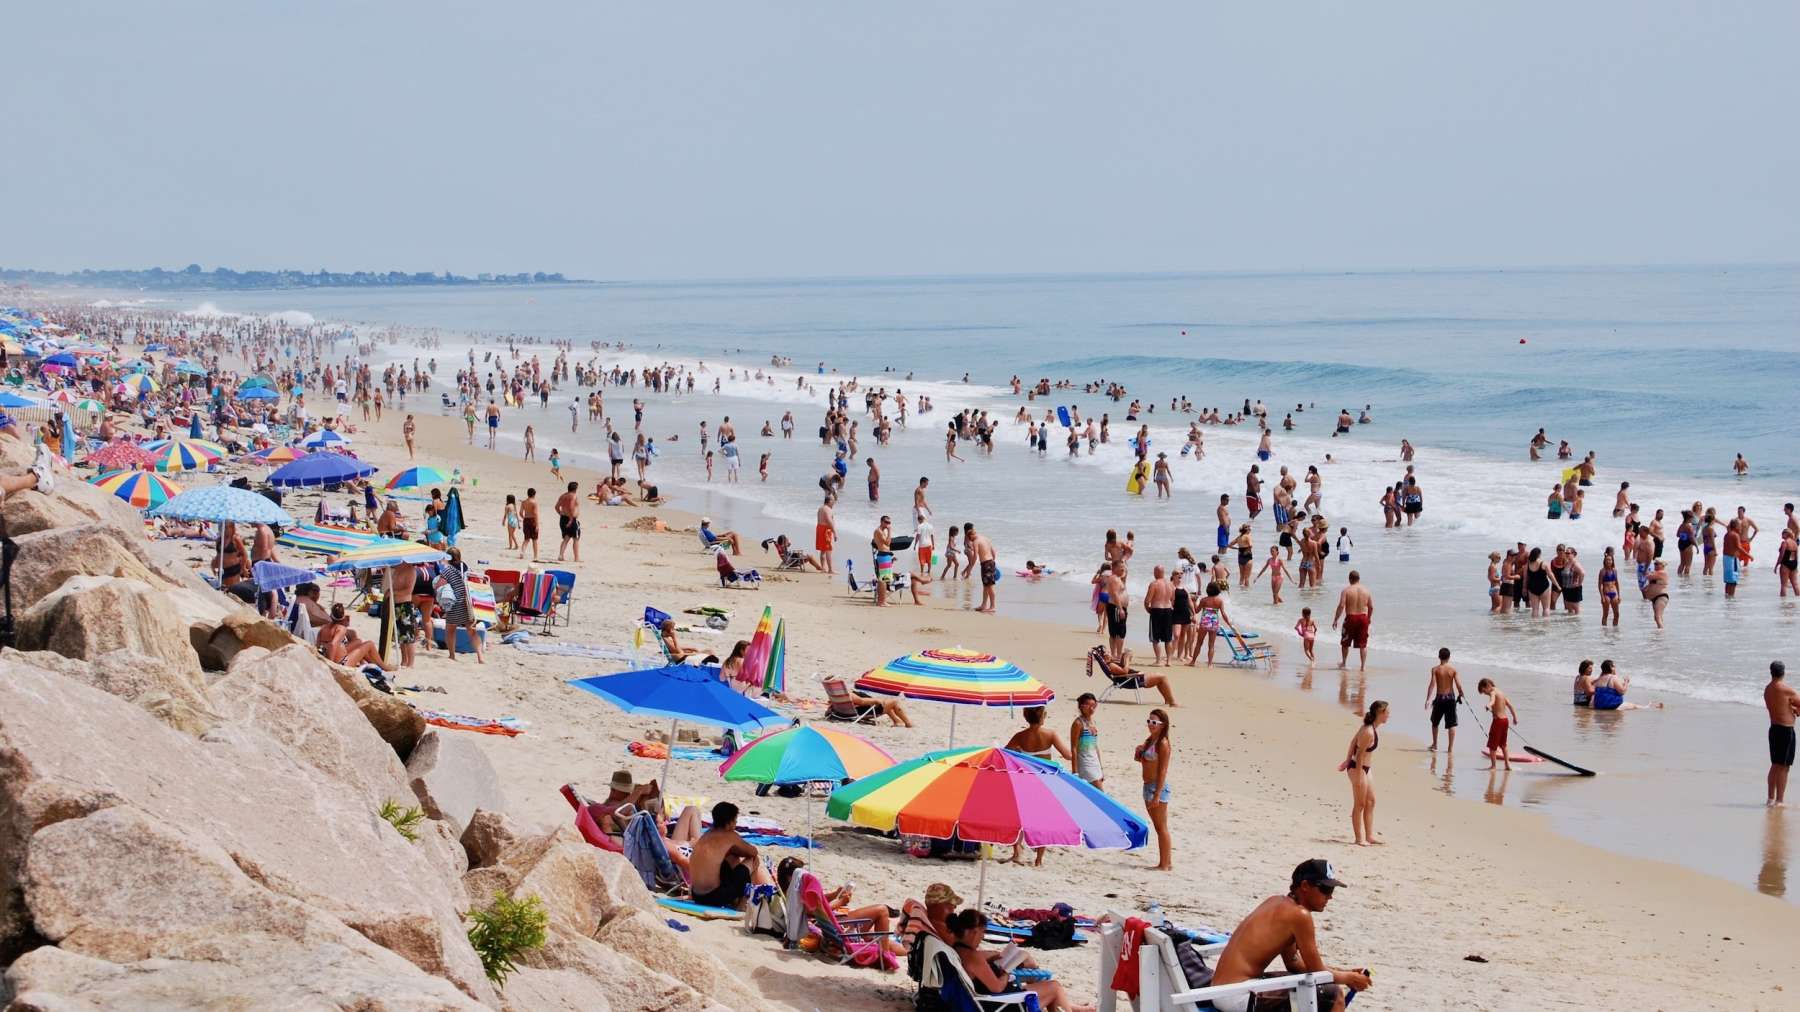 For transit riders, the beach is out of reach